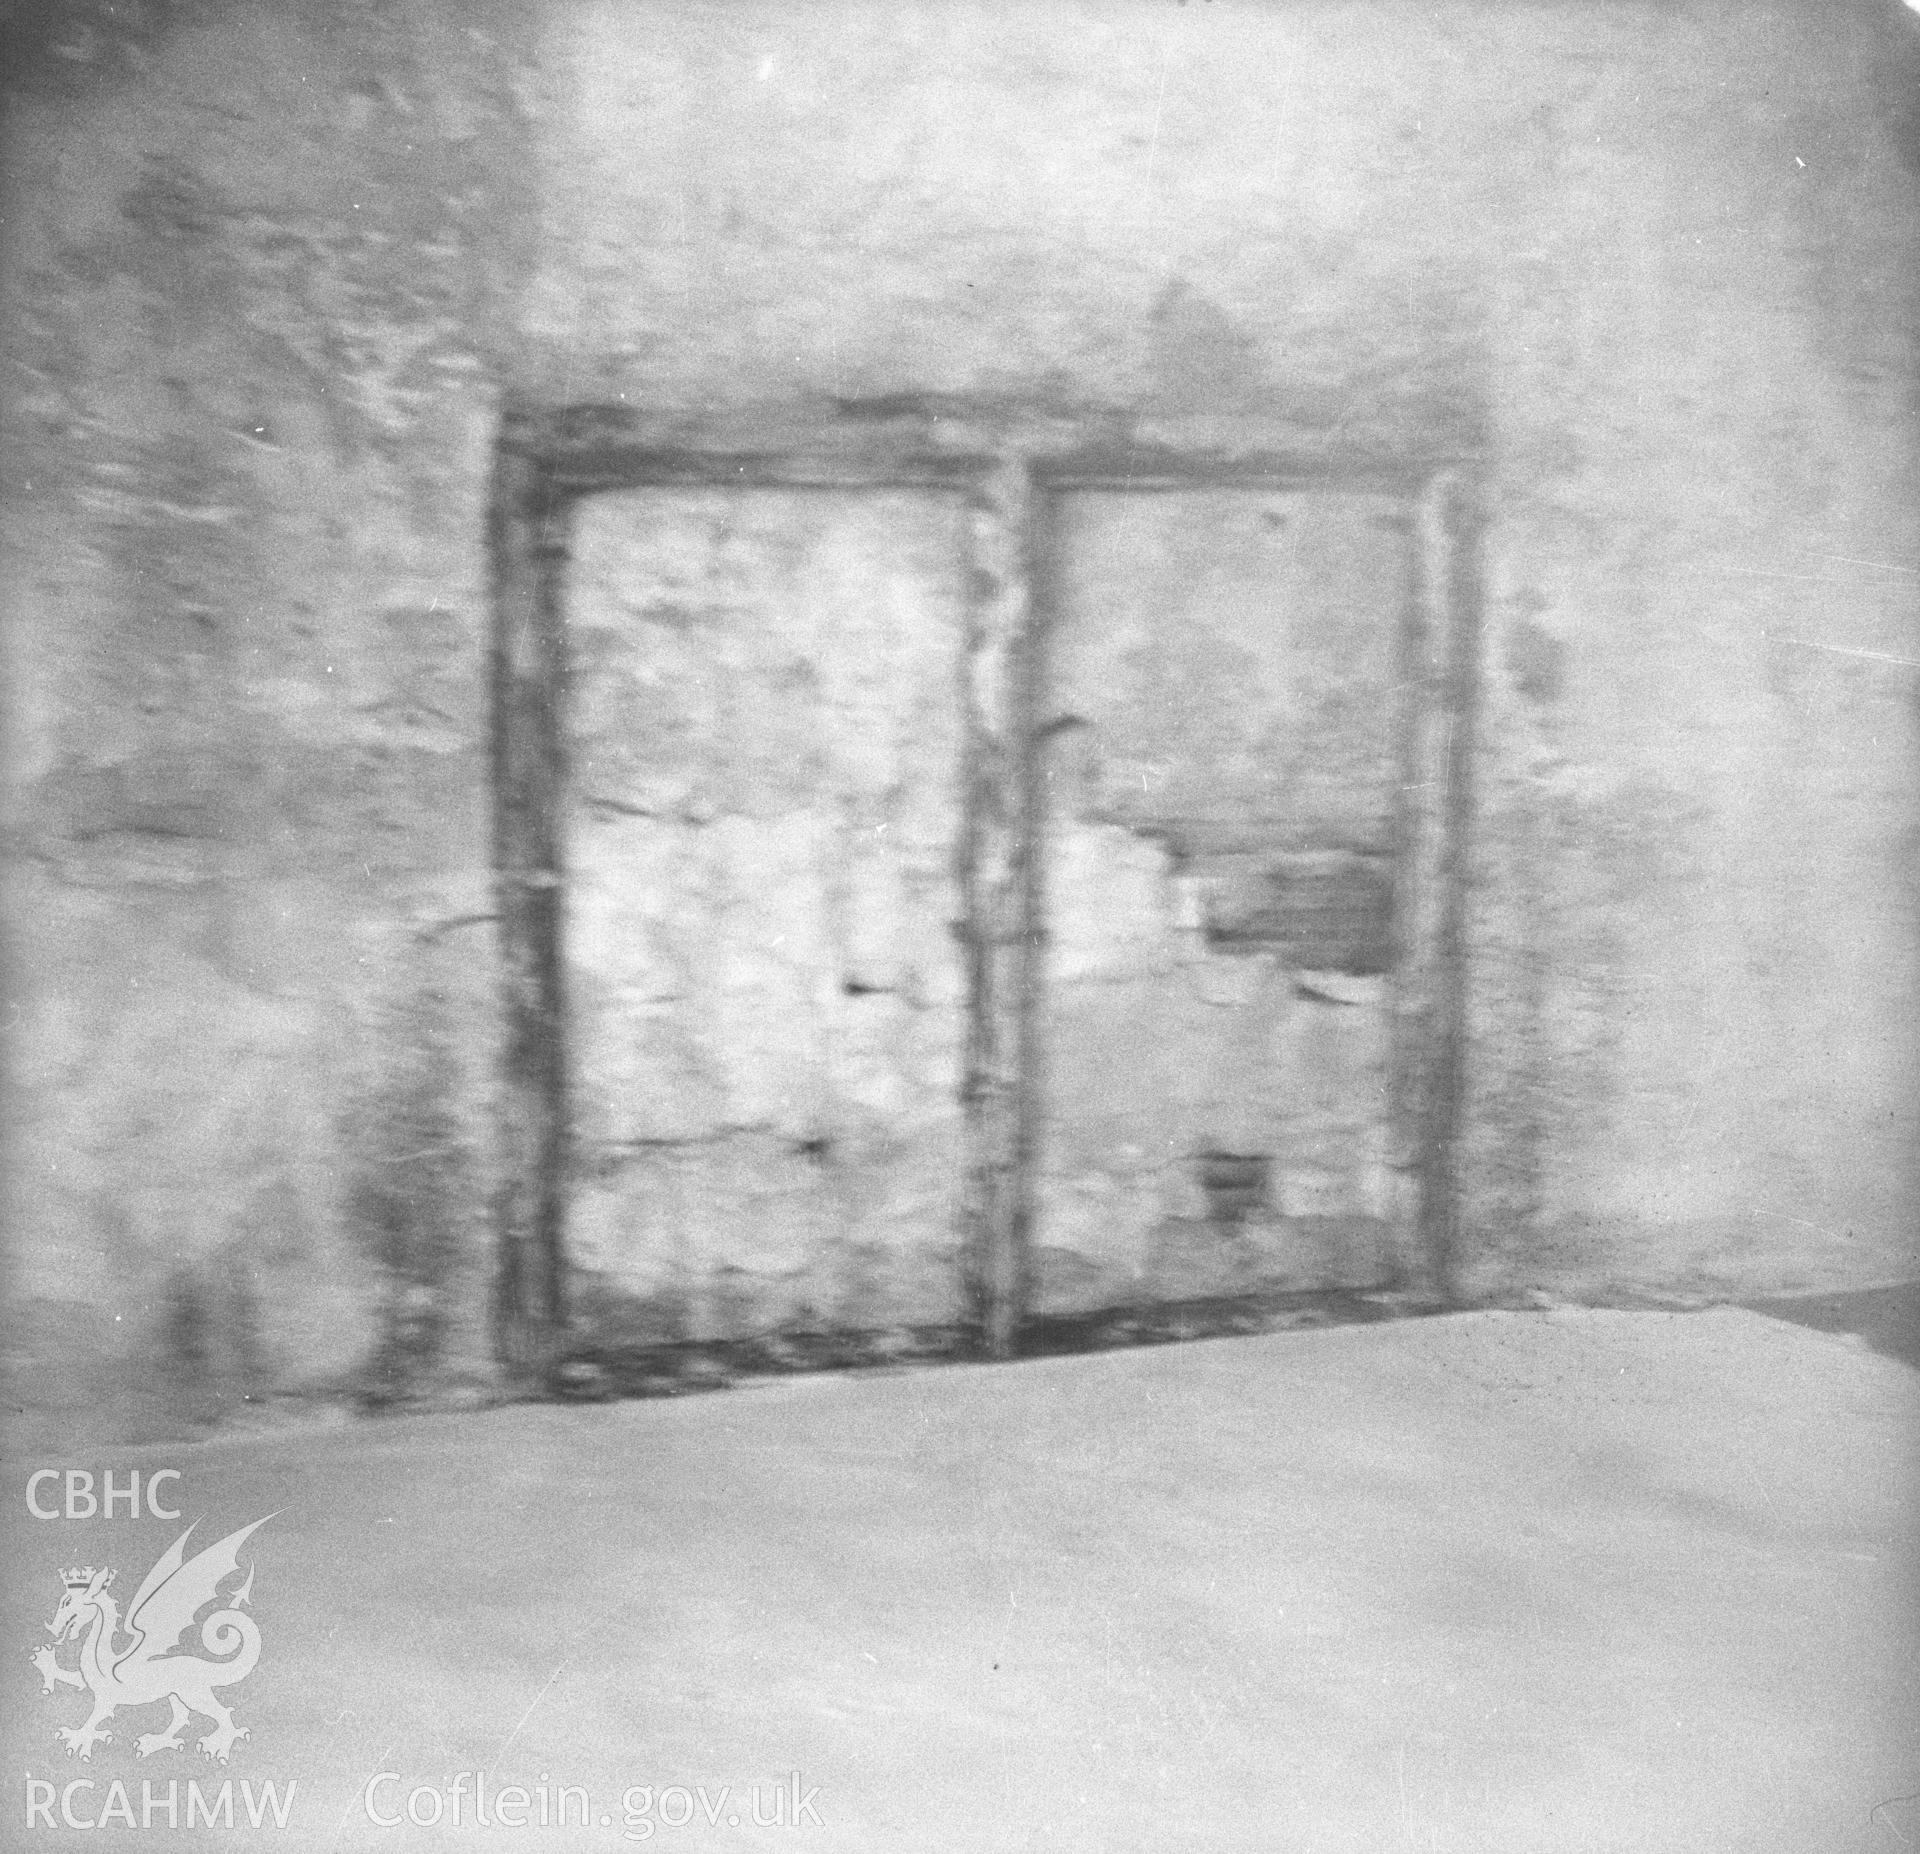 Digital copy of an undated nitrate negative showing interior timbers at 40 Cross Street, Abergavenny.